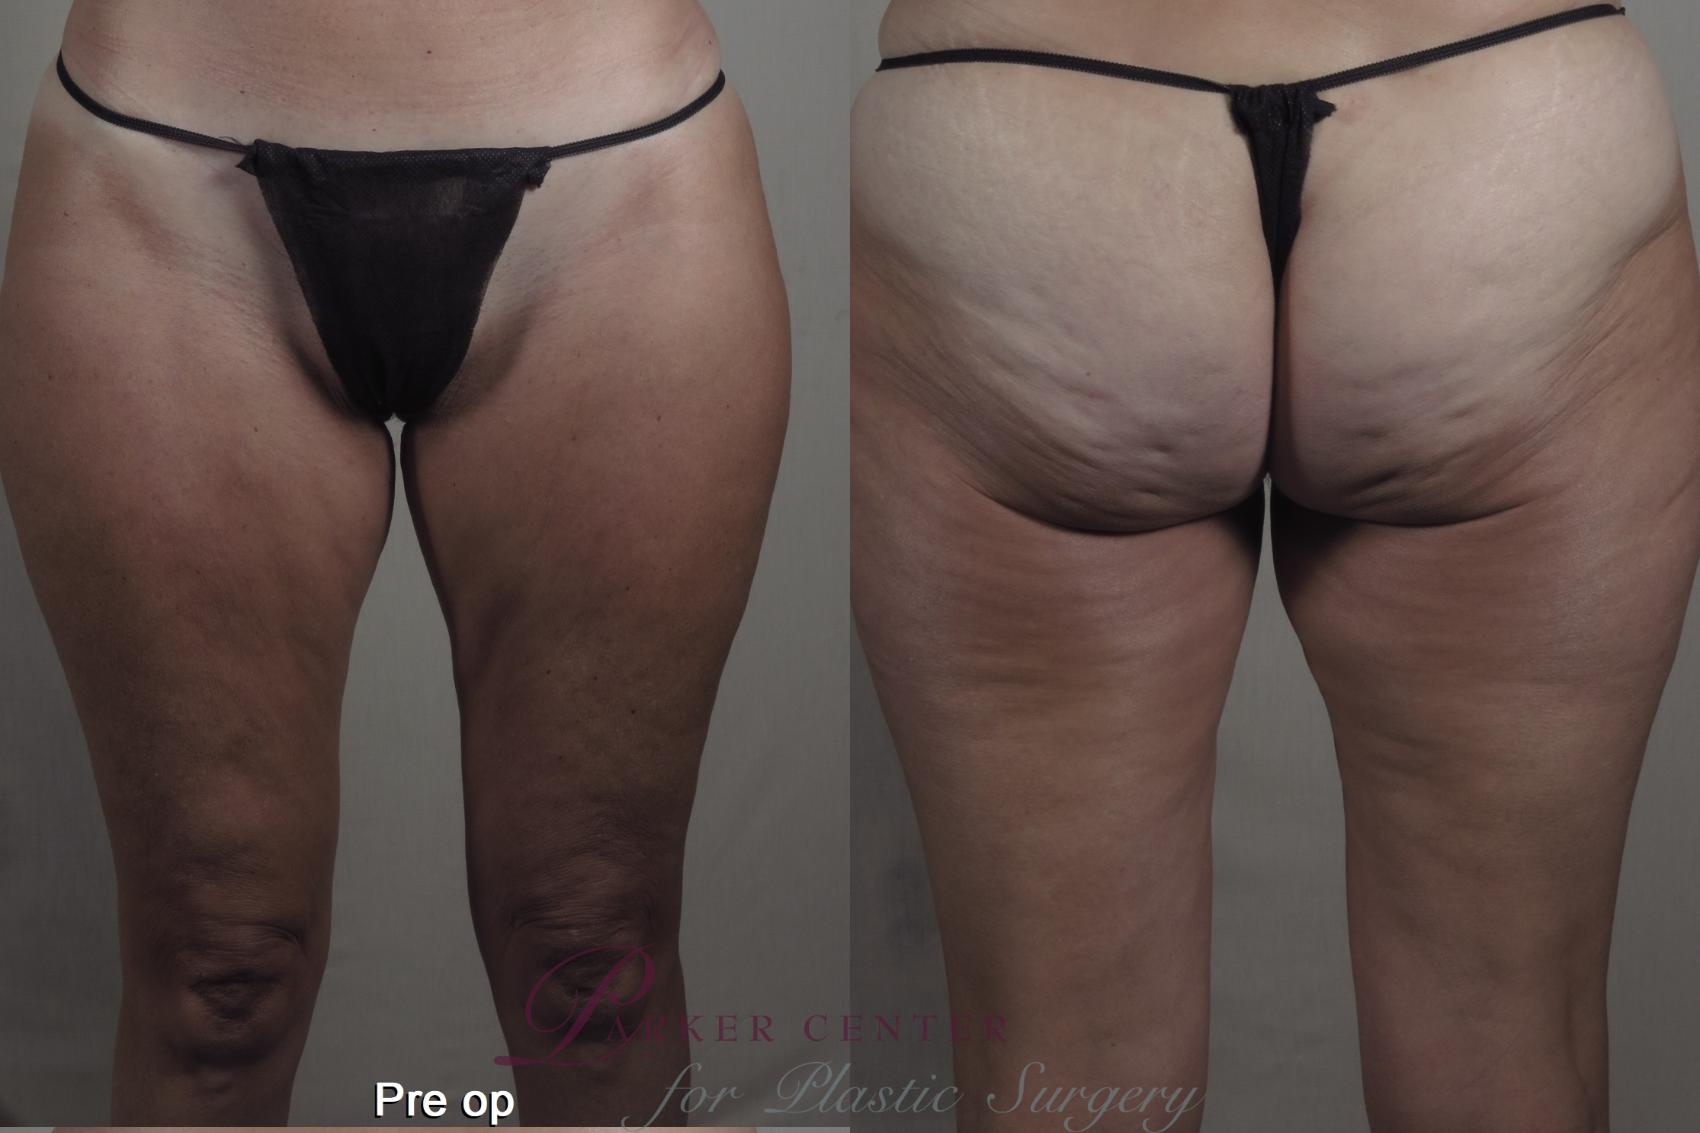 Do Compression Garments Really Help Plastic Surgery Results